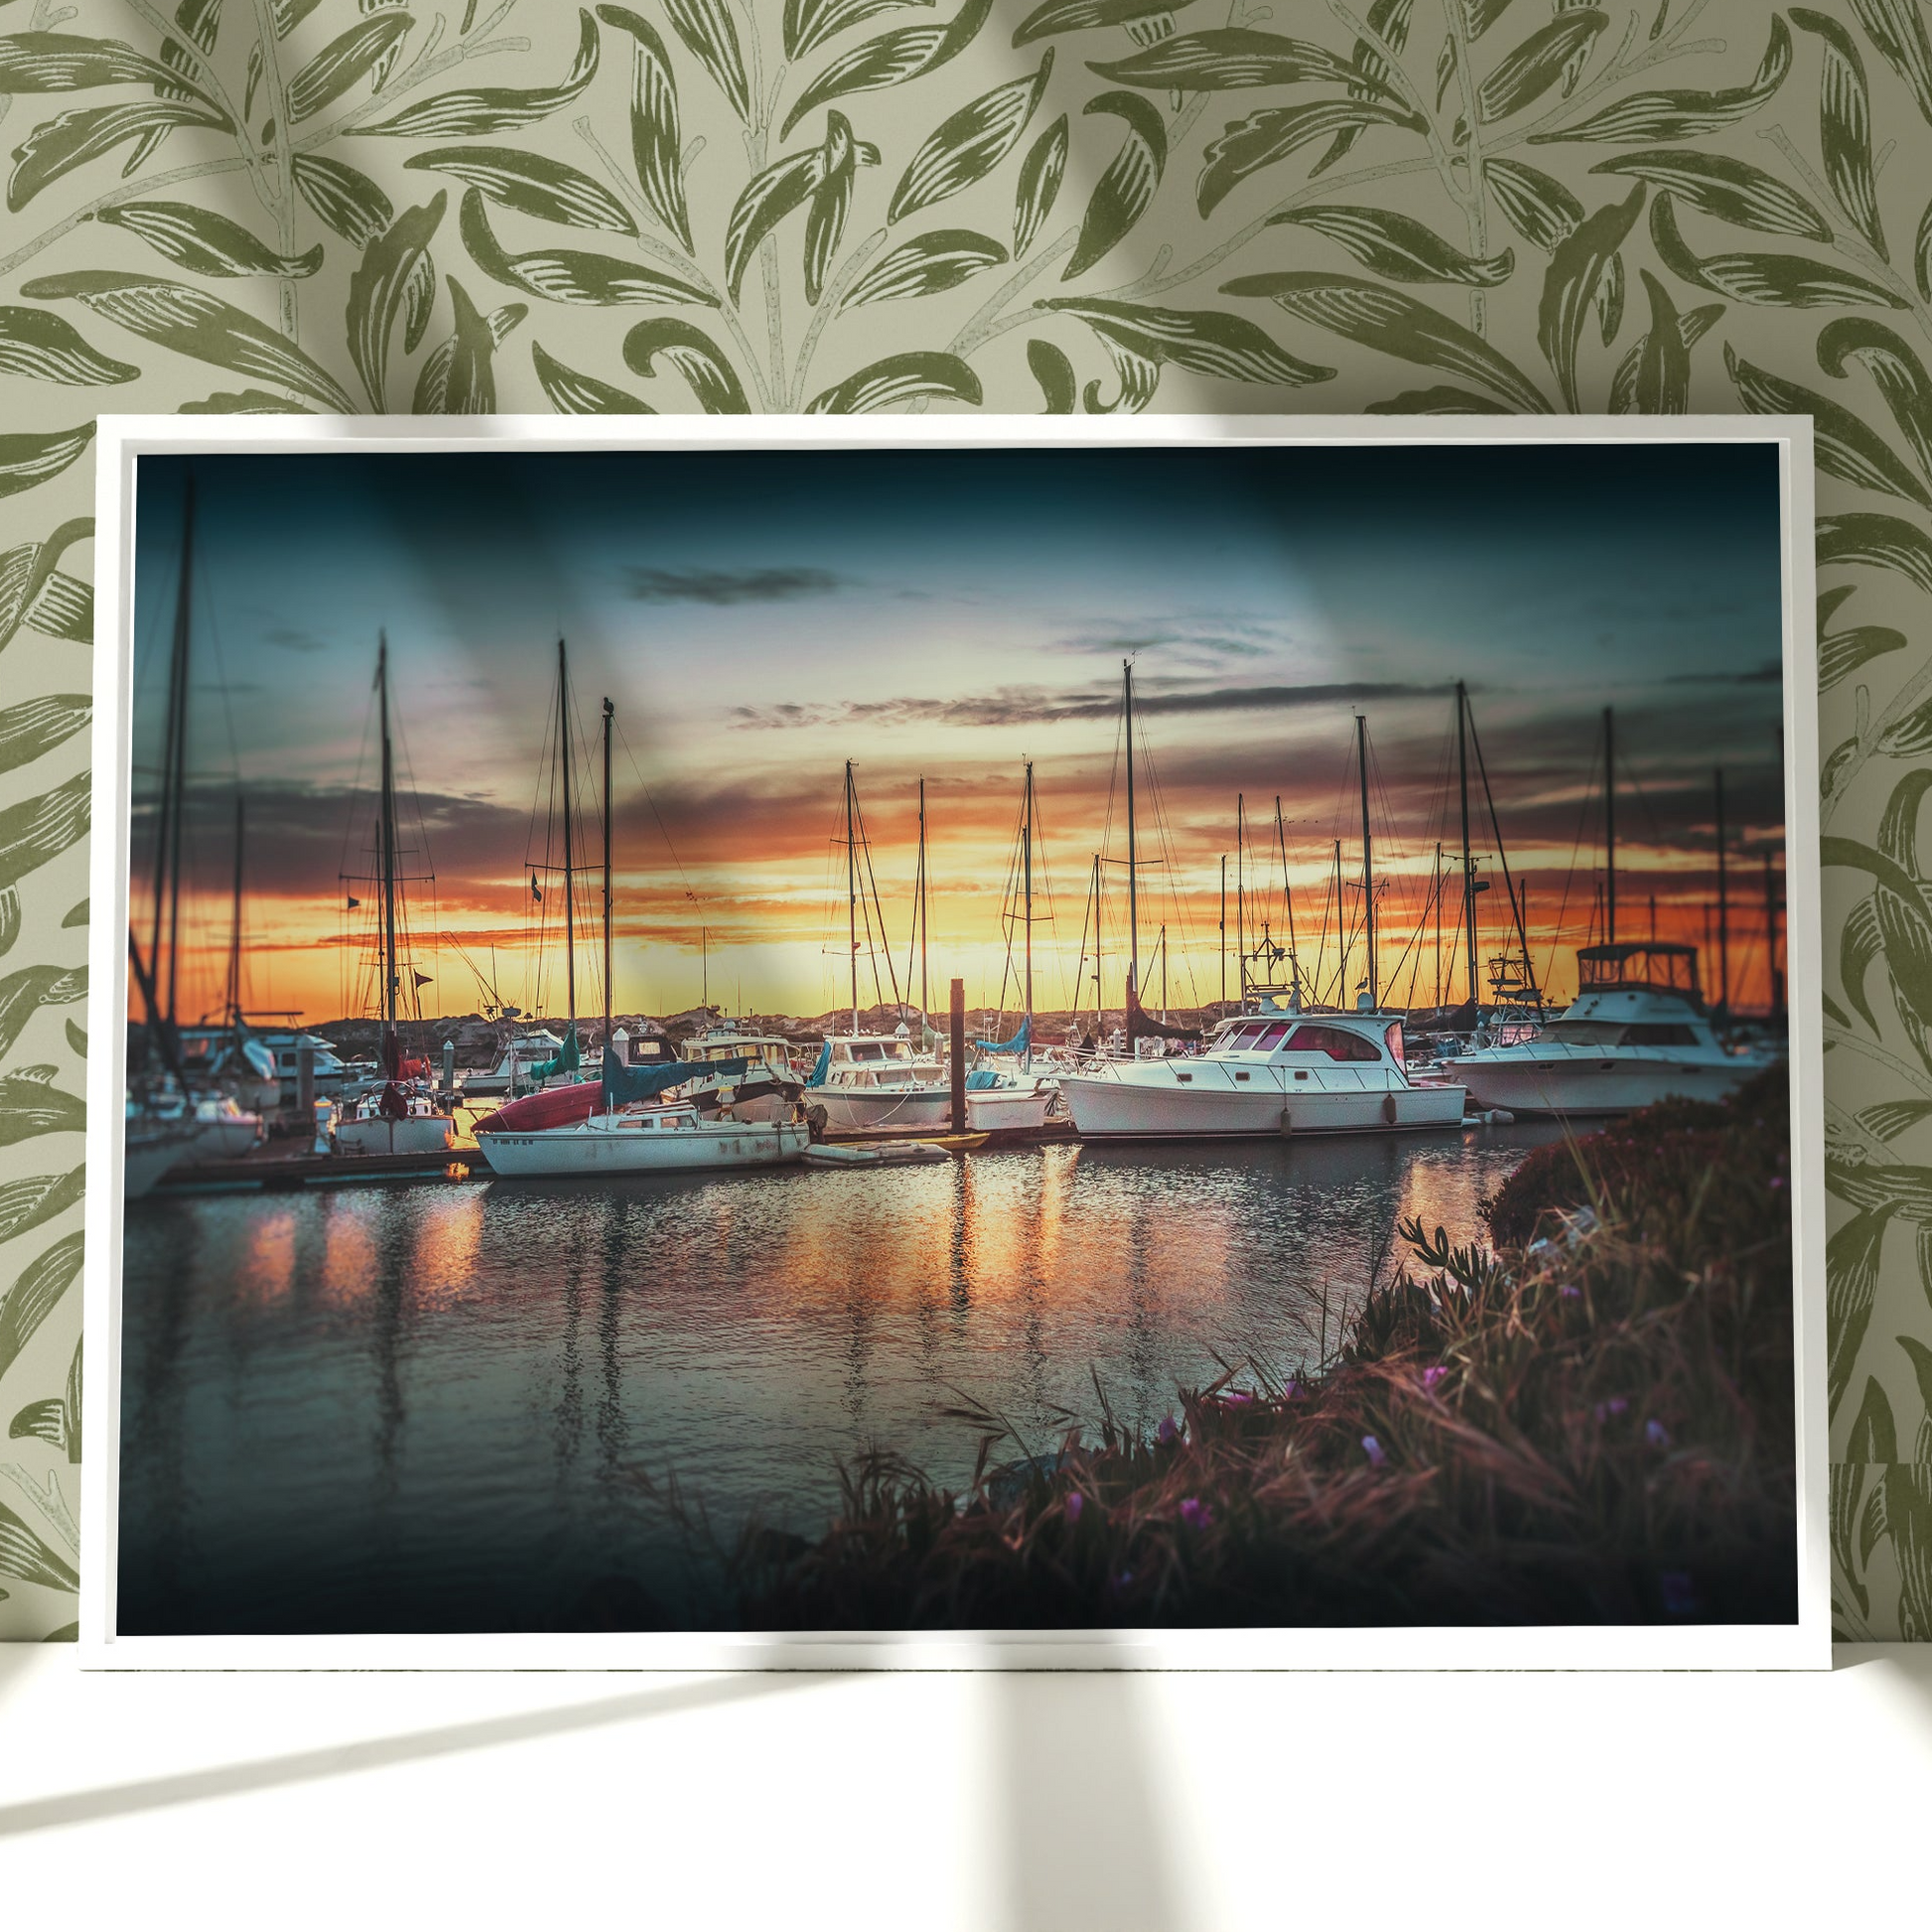 a painting of boats in a harbor at sunset